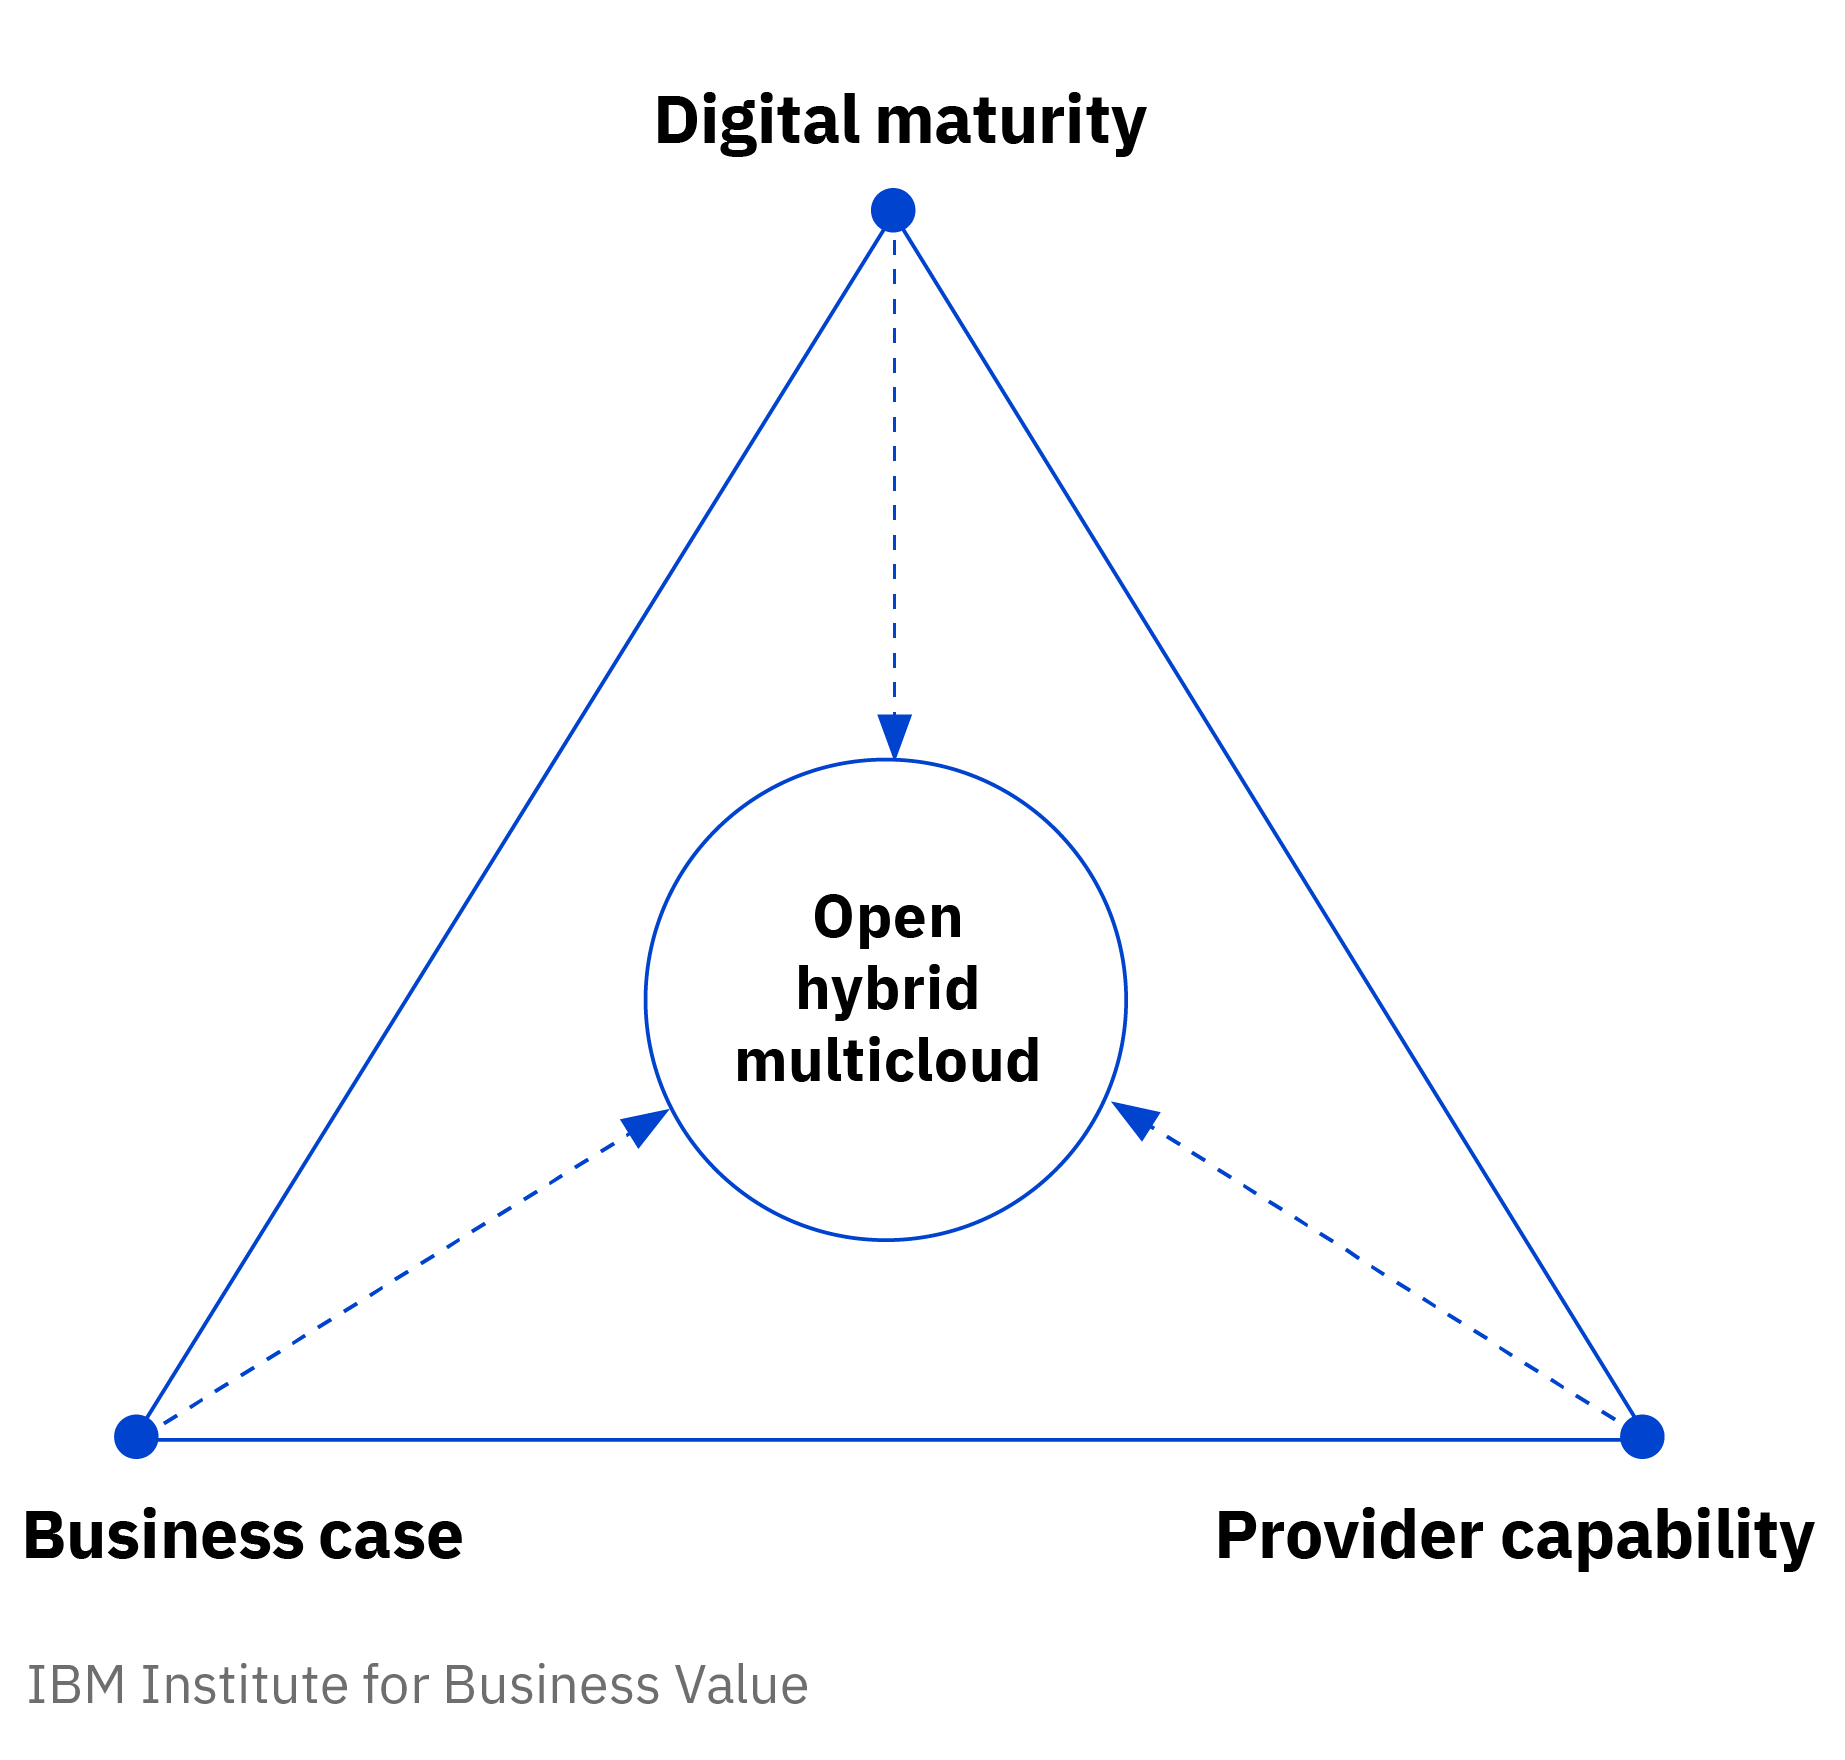 Banks should evaluate three key areas when considering open hybrid multicloud